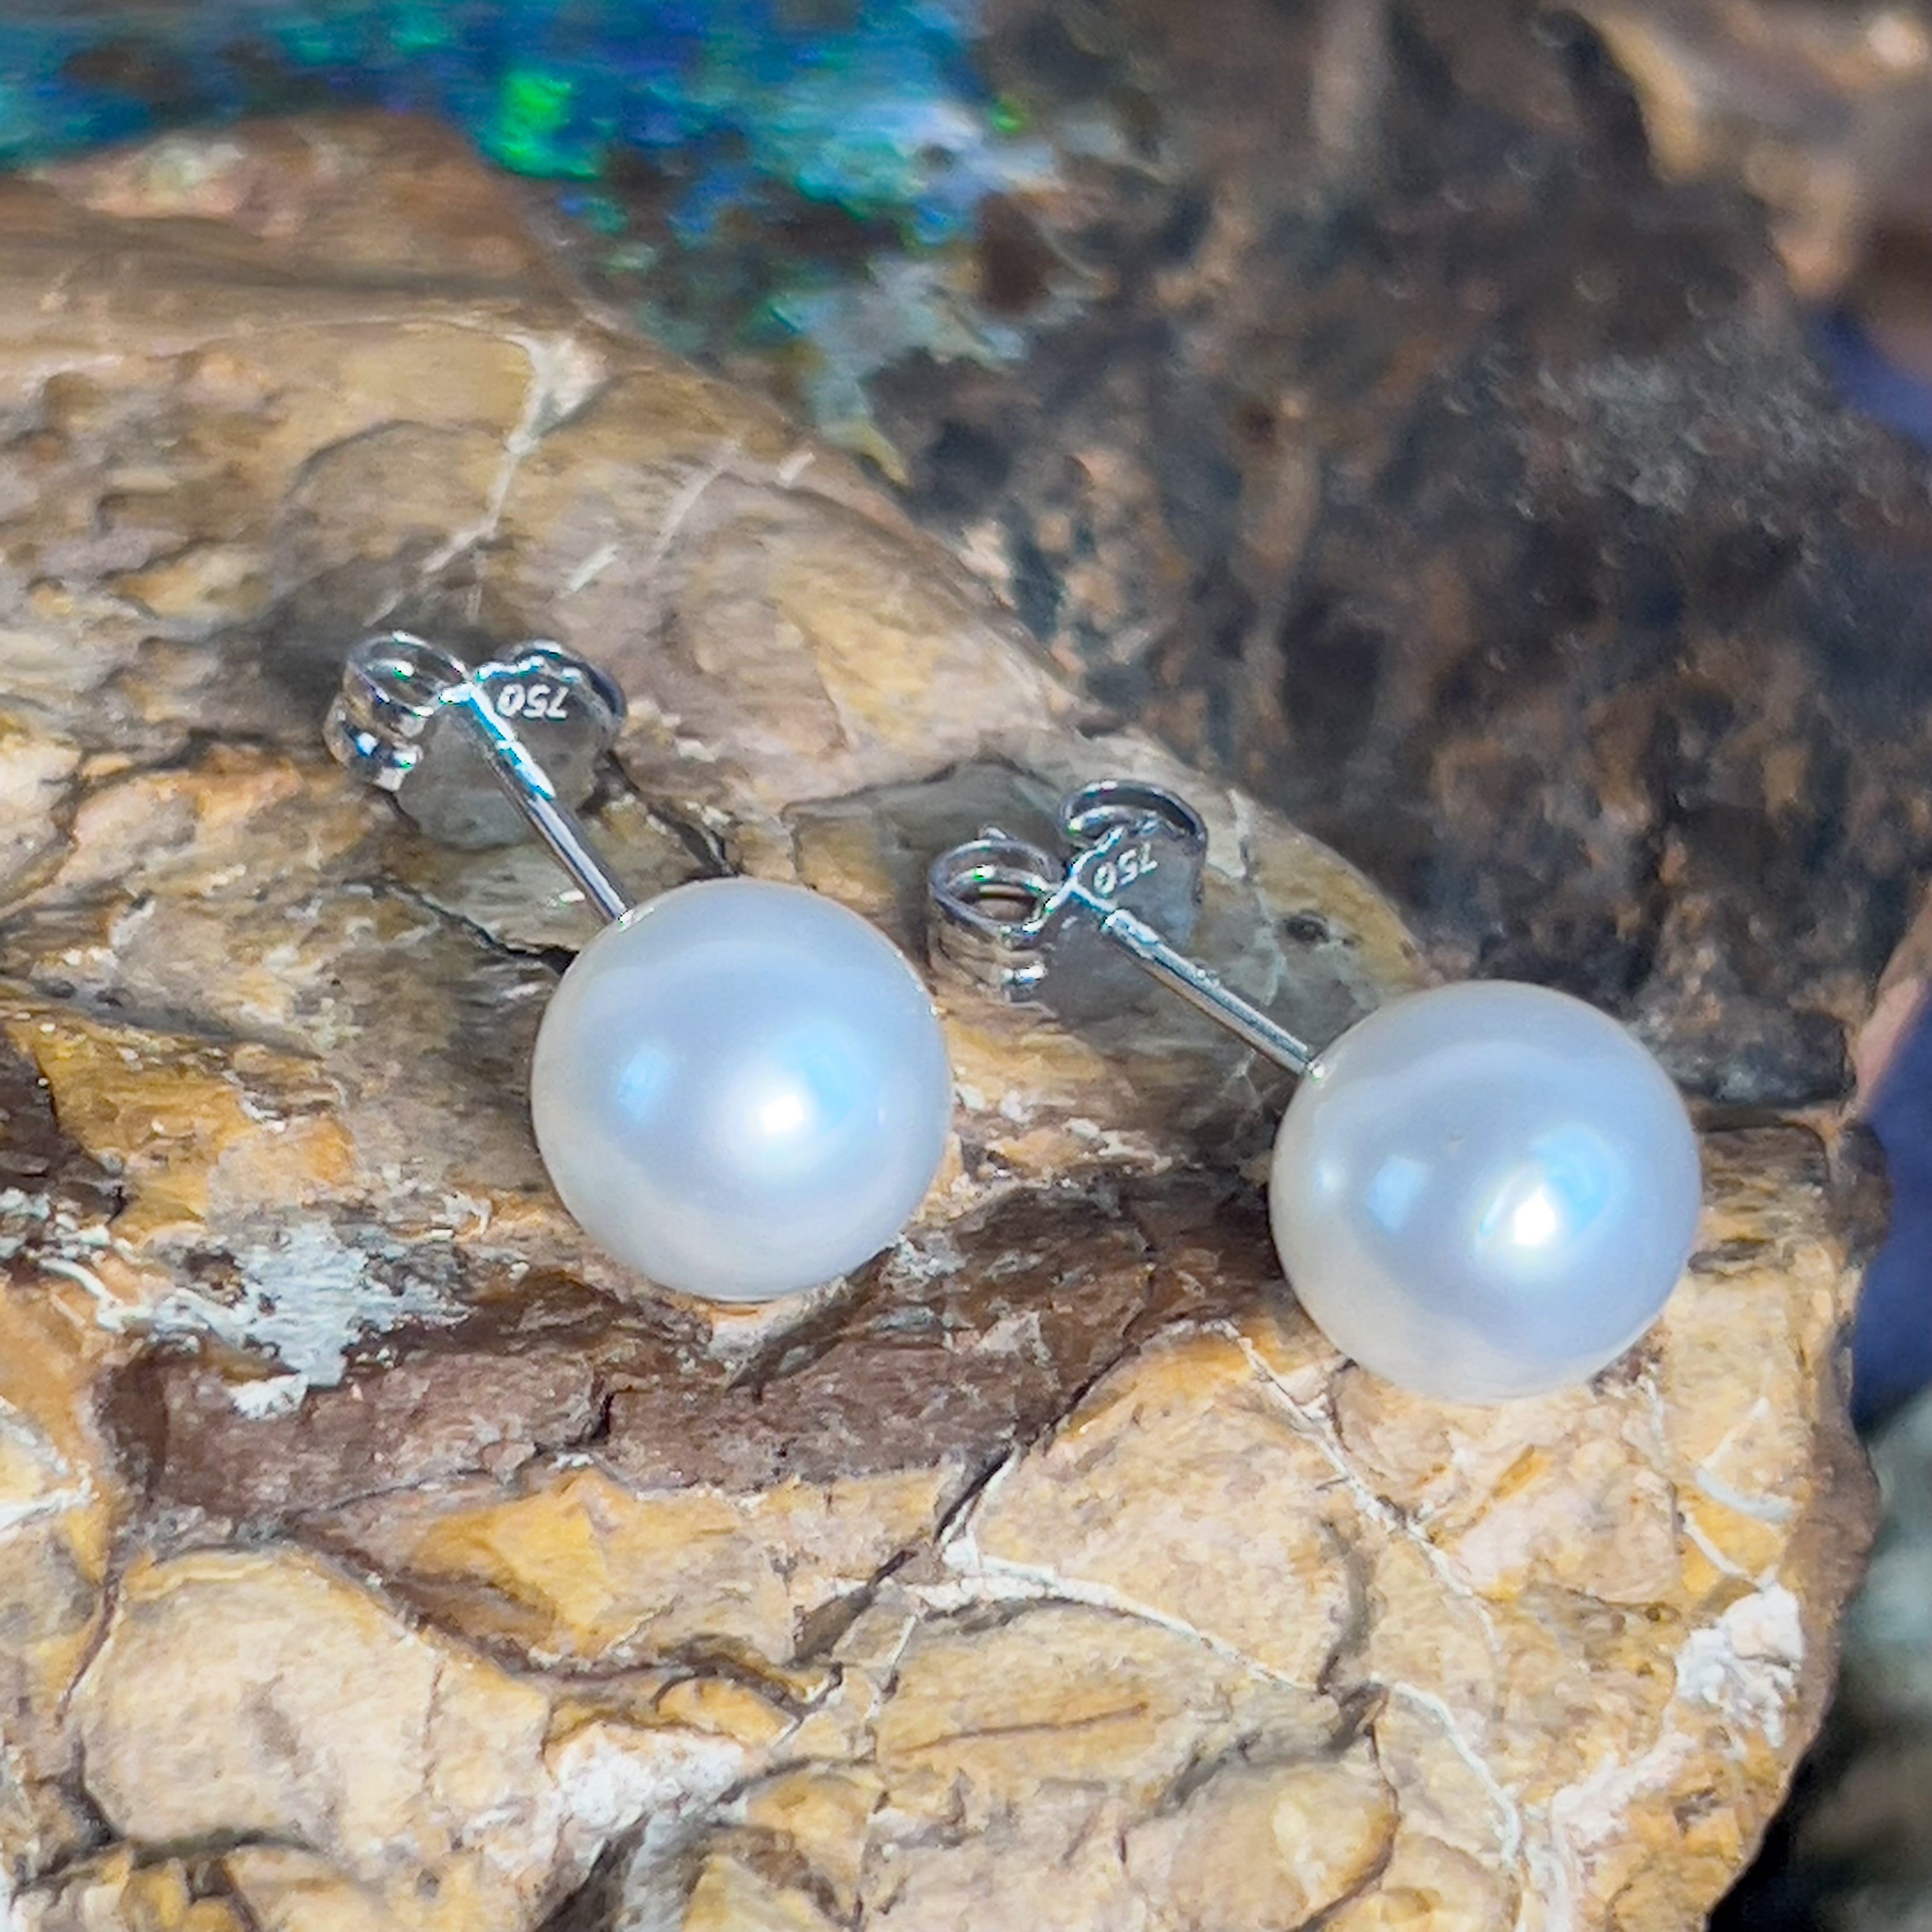 Pair of South Sea Pearls 8-9mm with 18kt White Gold studs - Masterpiece Jewellery Opal & Gems Sydney Australia | Online Shop